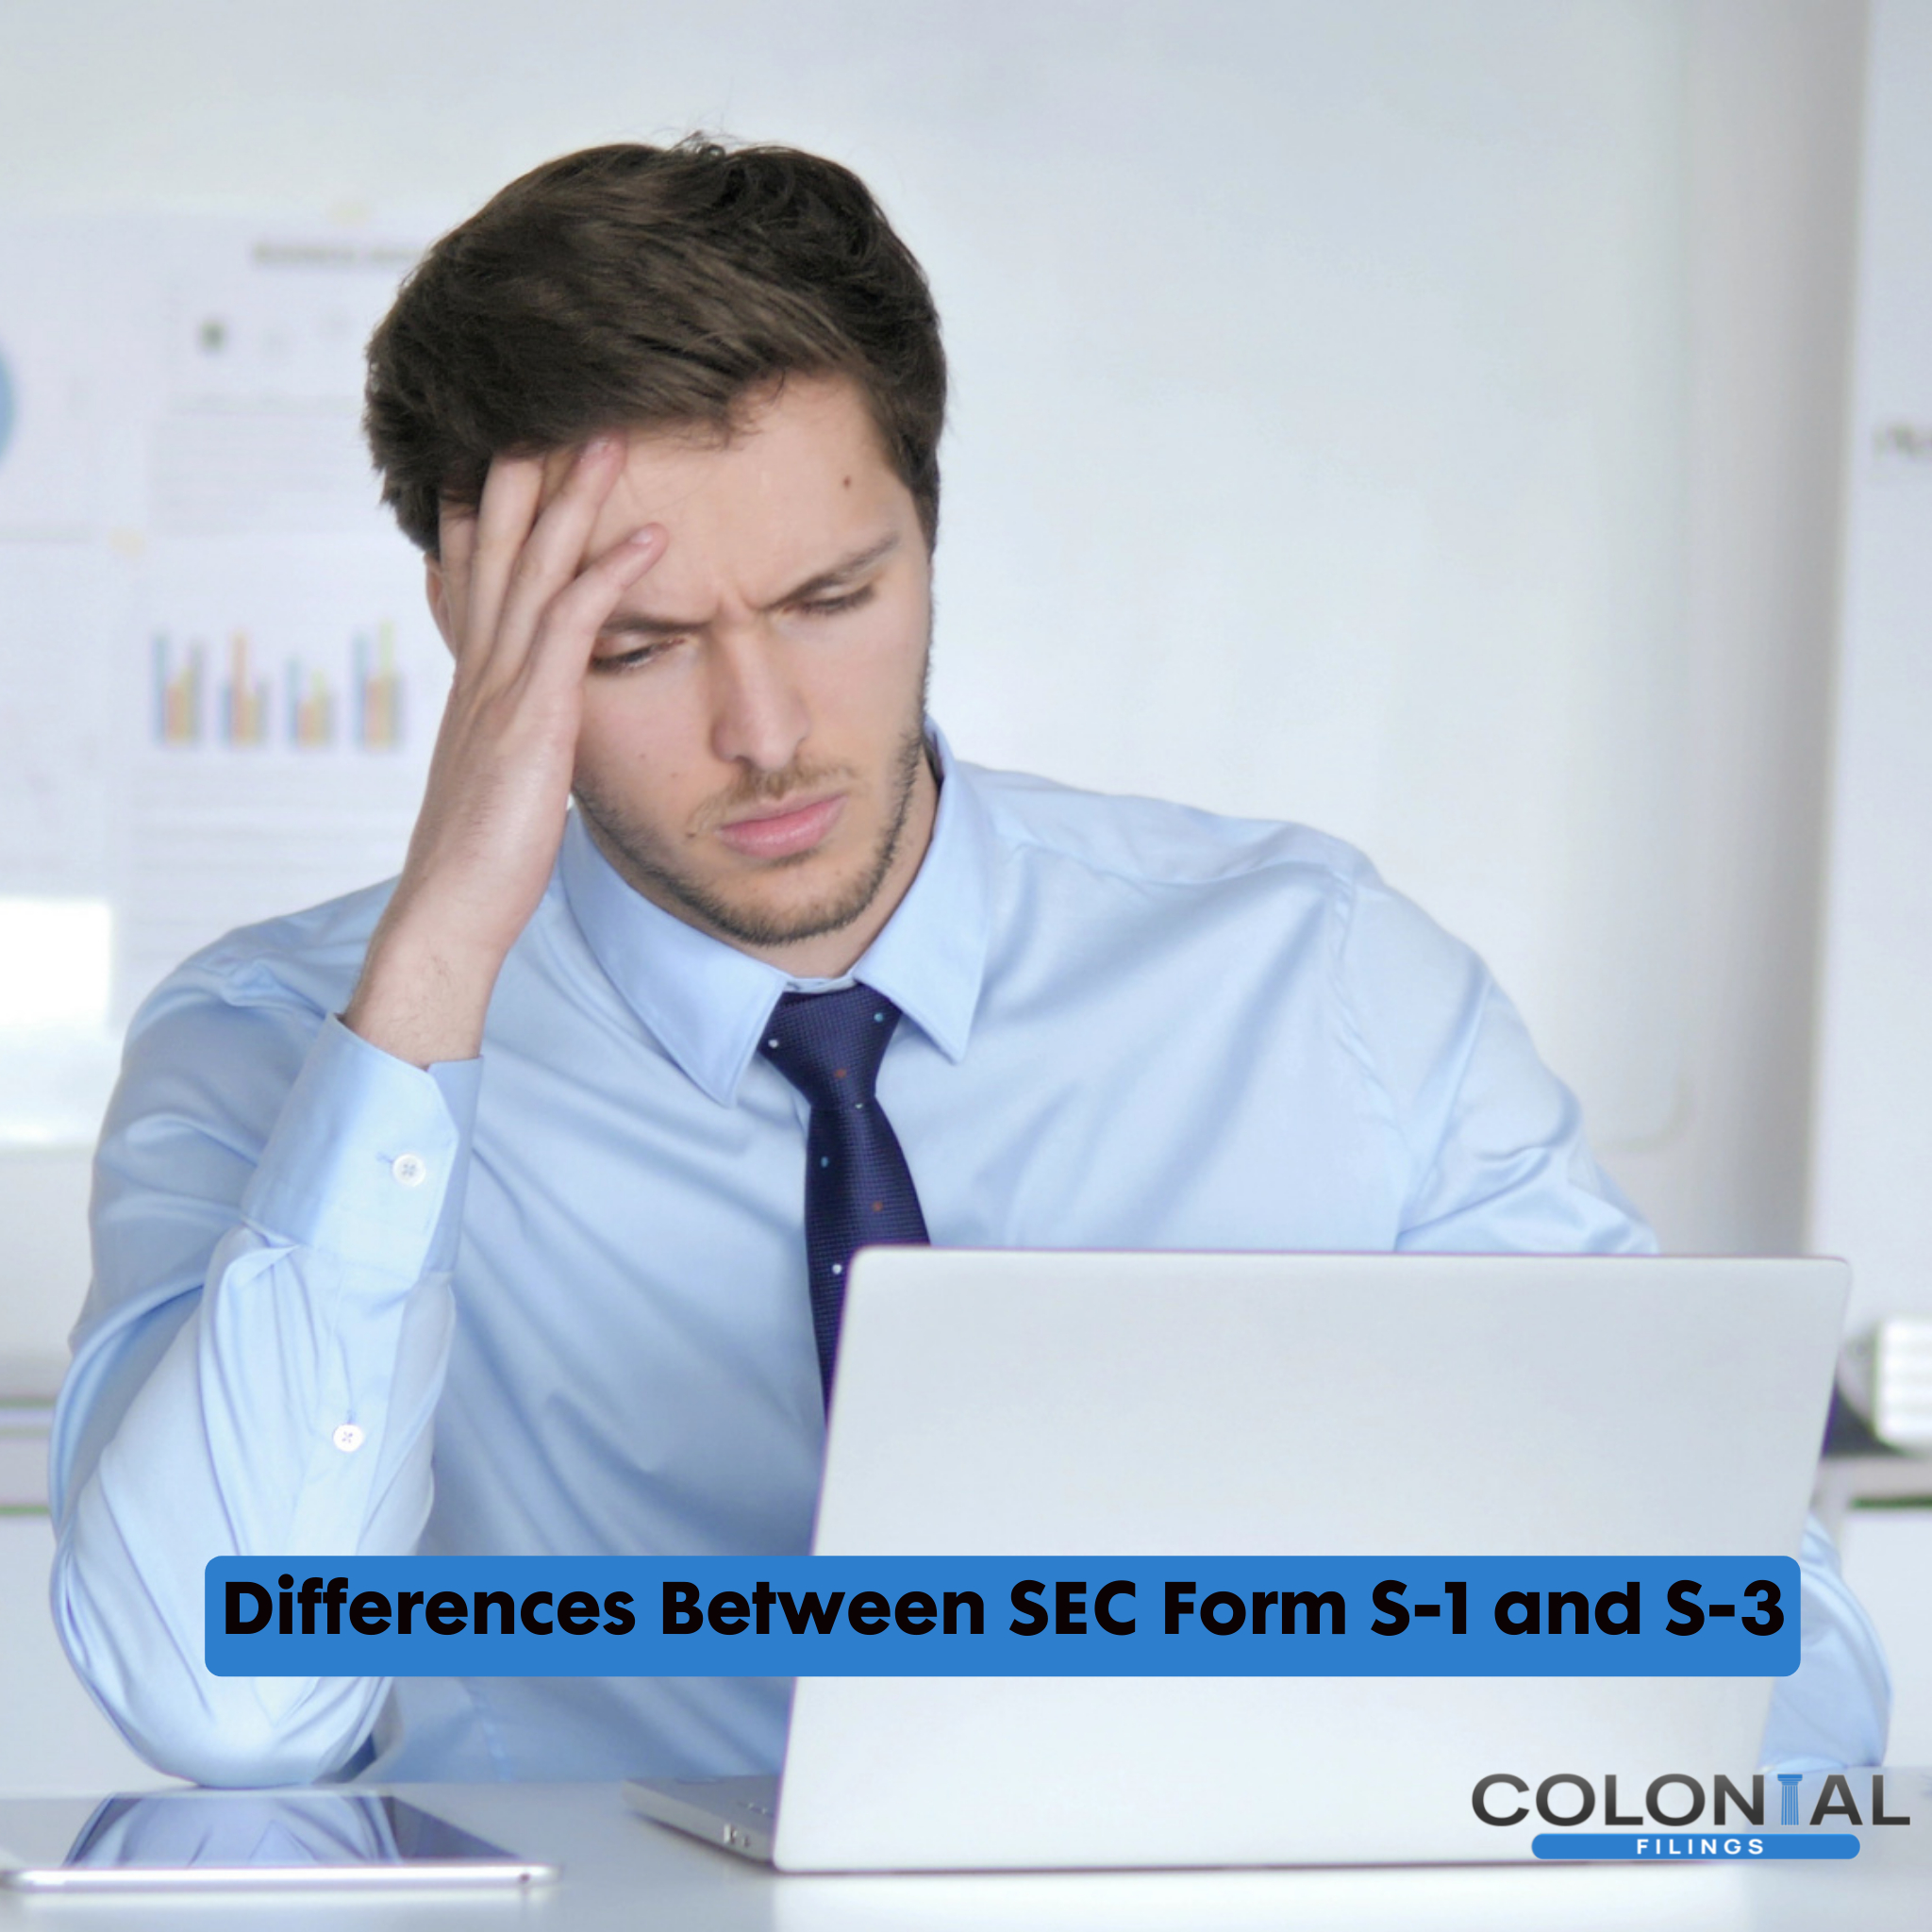 SEC Form S-1 - Overview, Requirements, How To Complete